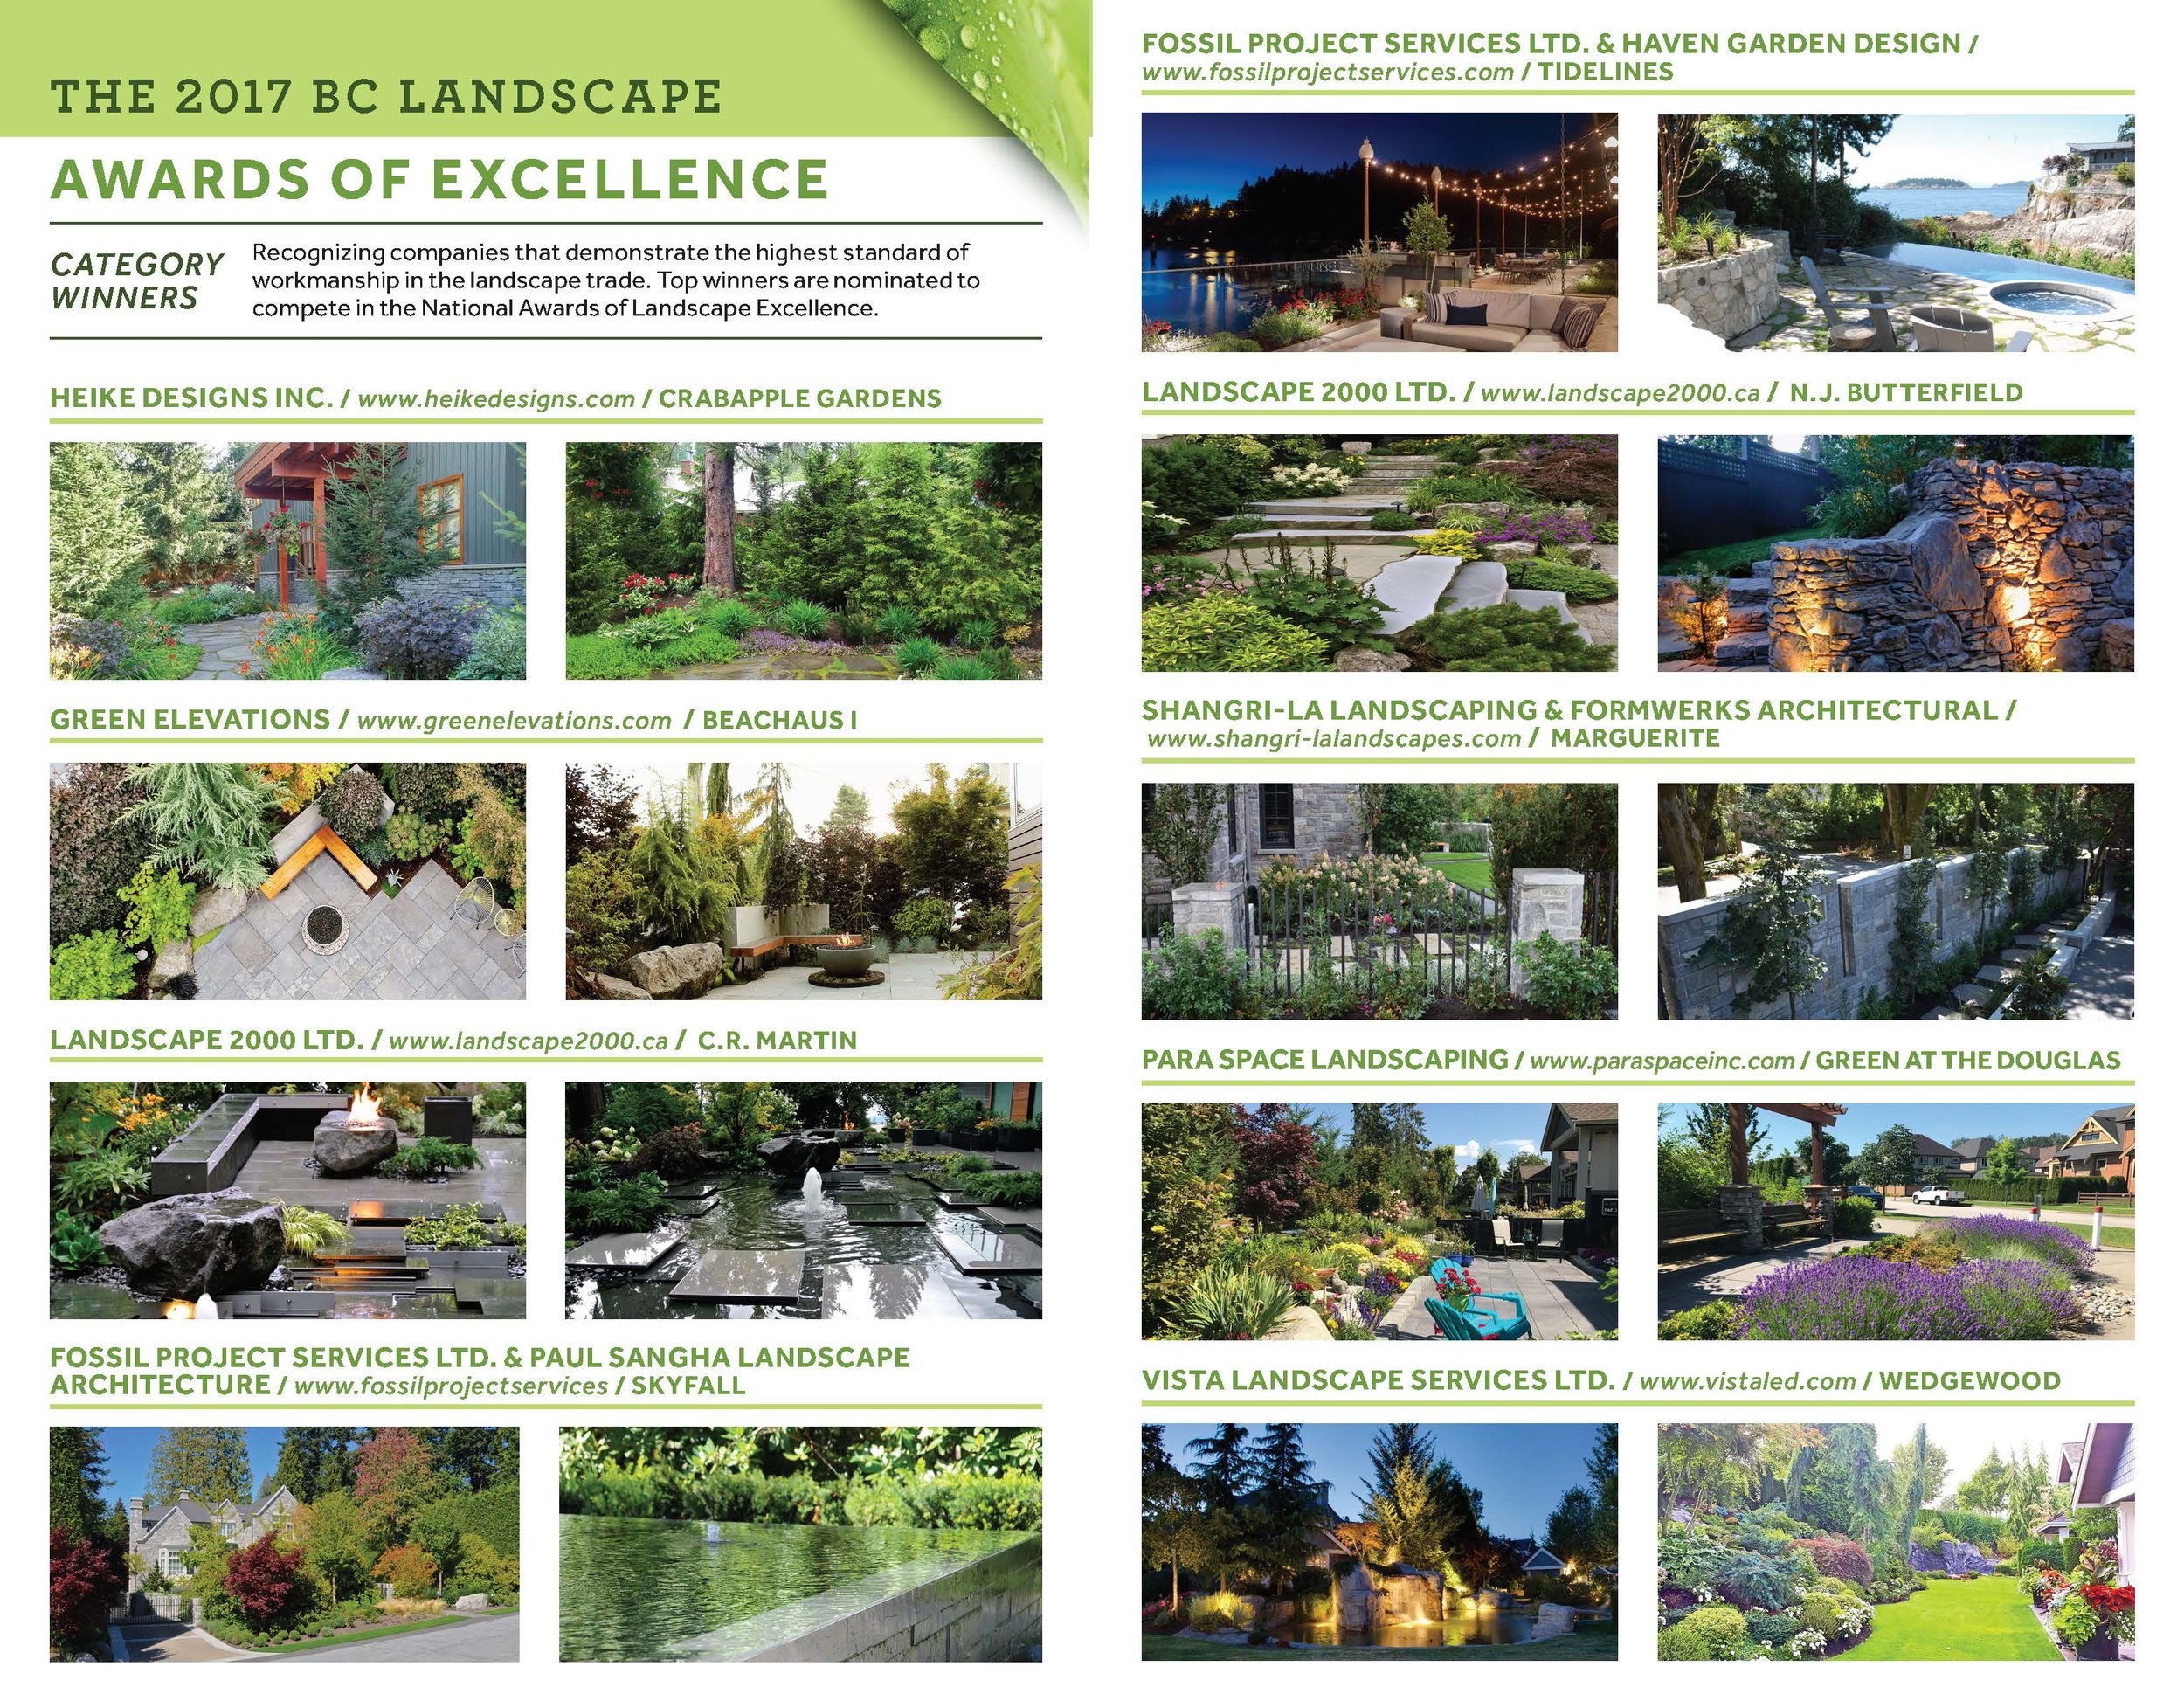 BCLNA_GardenWise_Booklet_FA_ReaderSpreads_Page_09.jpg